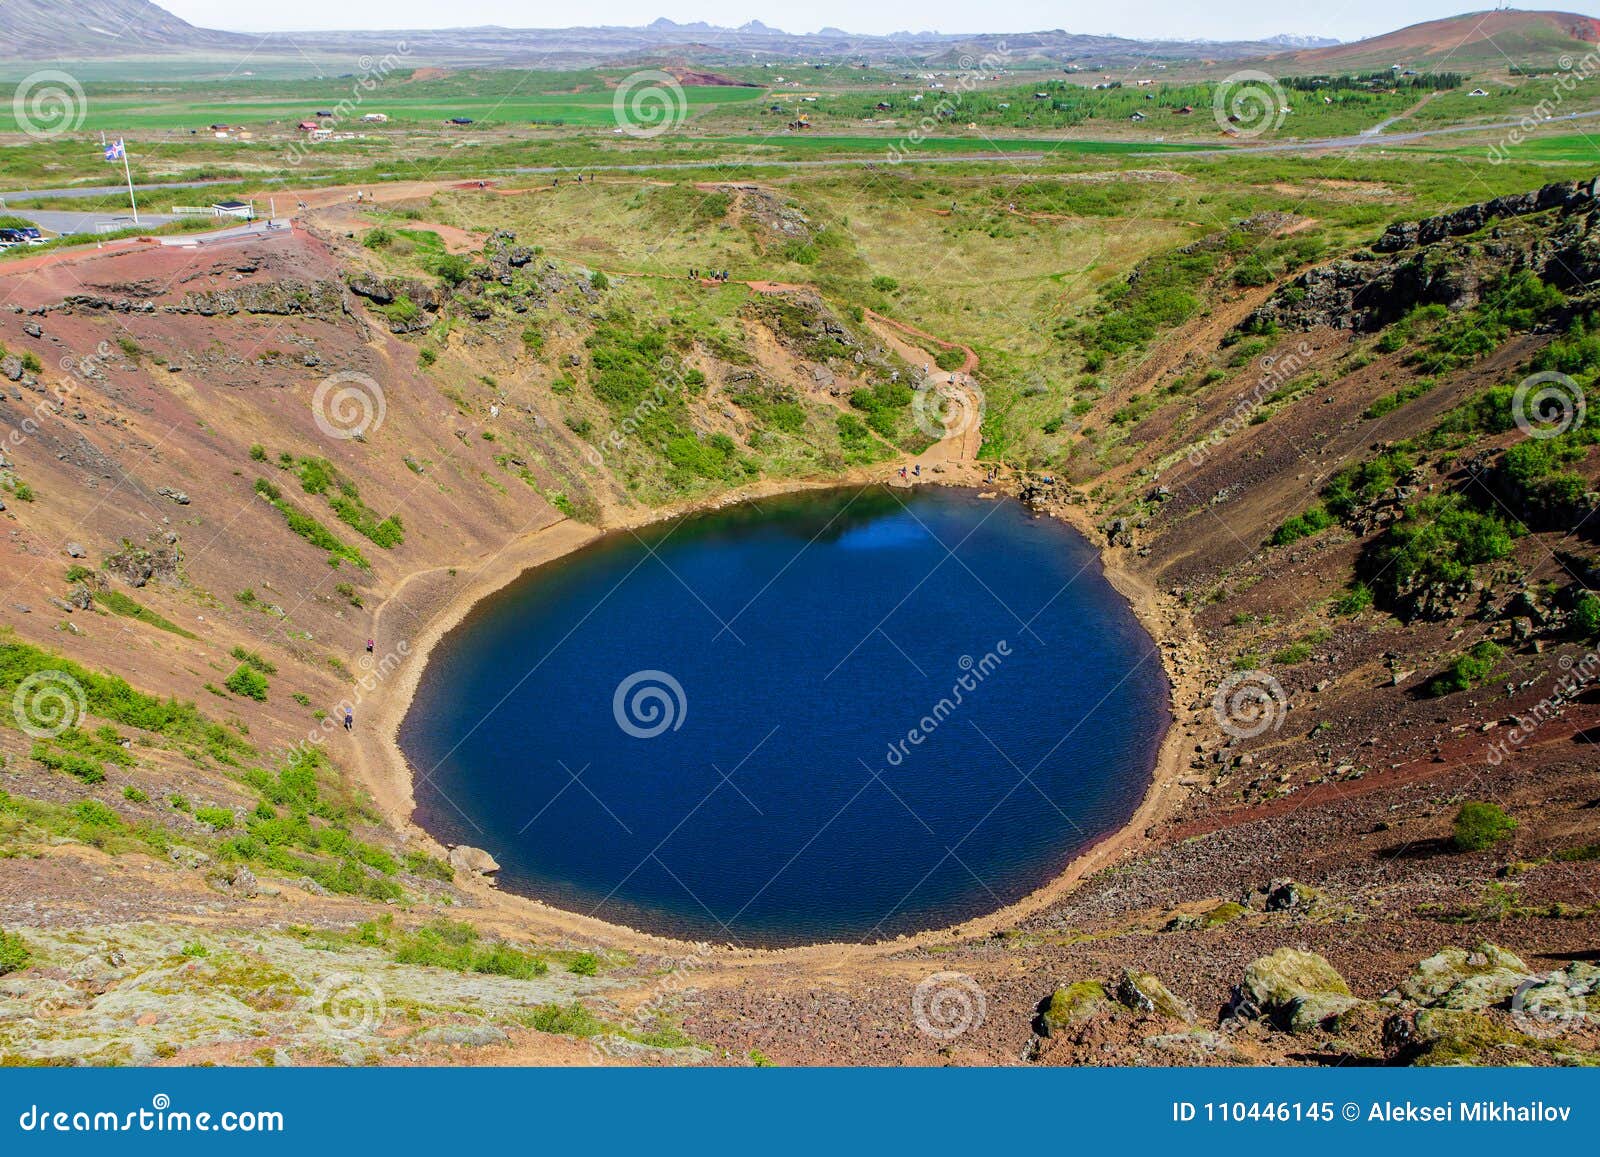 Can You Swim In Kerid Crater Lake Kerid Crater Volcanic Crater Lake In Golden Circle Iceland 11 06 2017 Stock Image Image Of Hill Icelandic 110446145